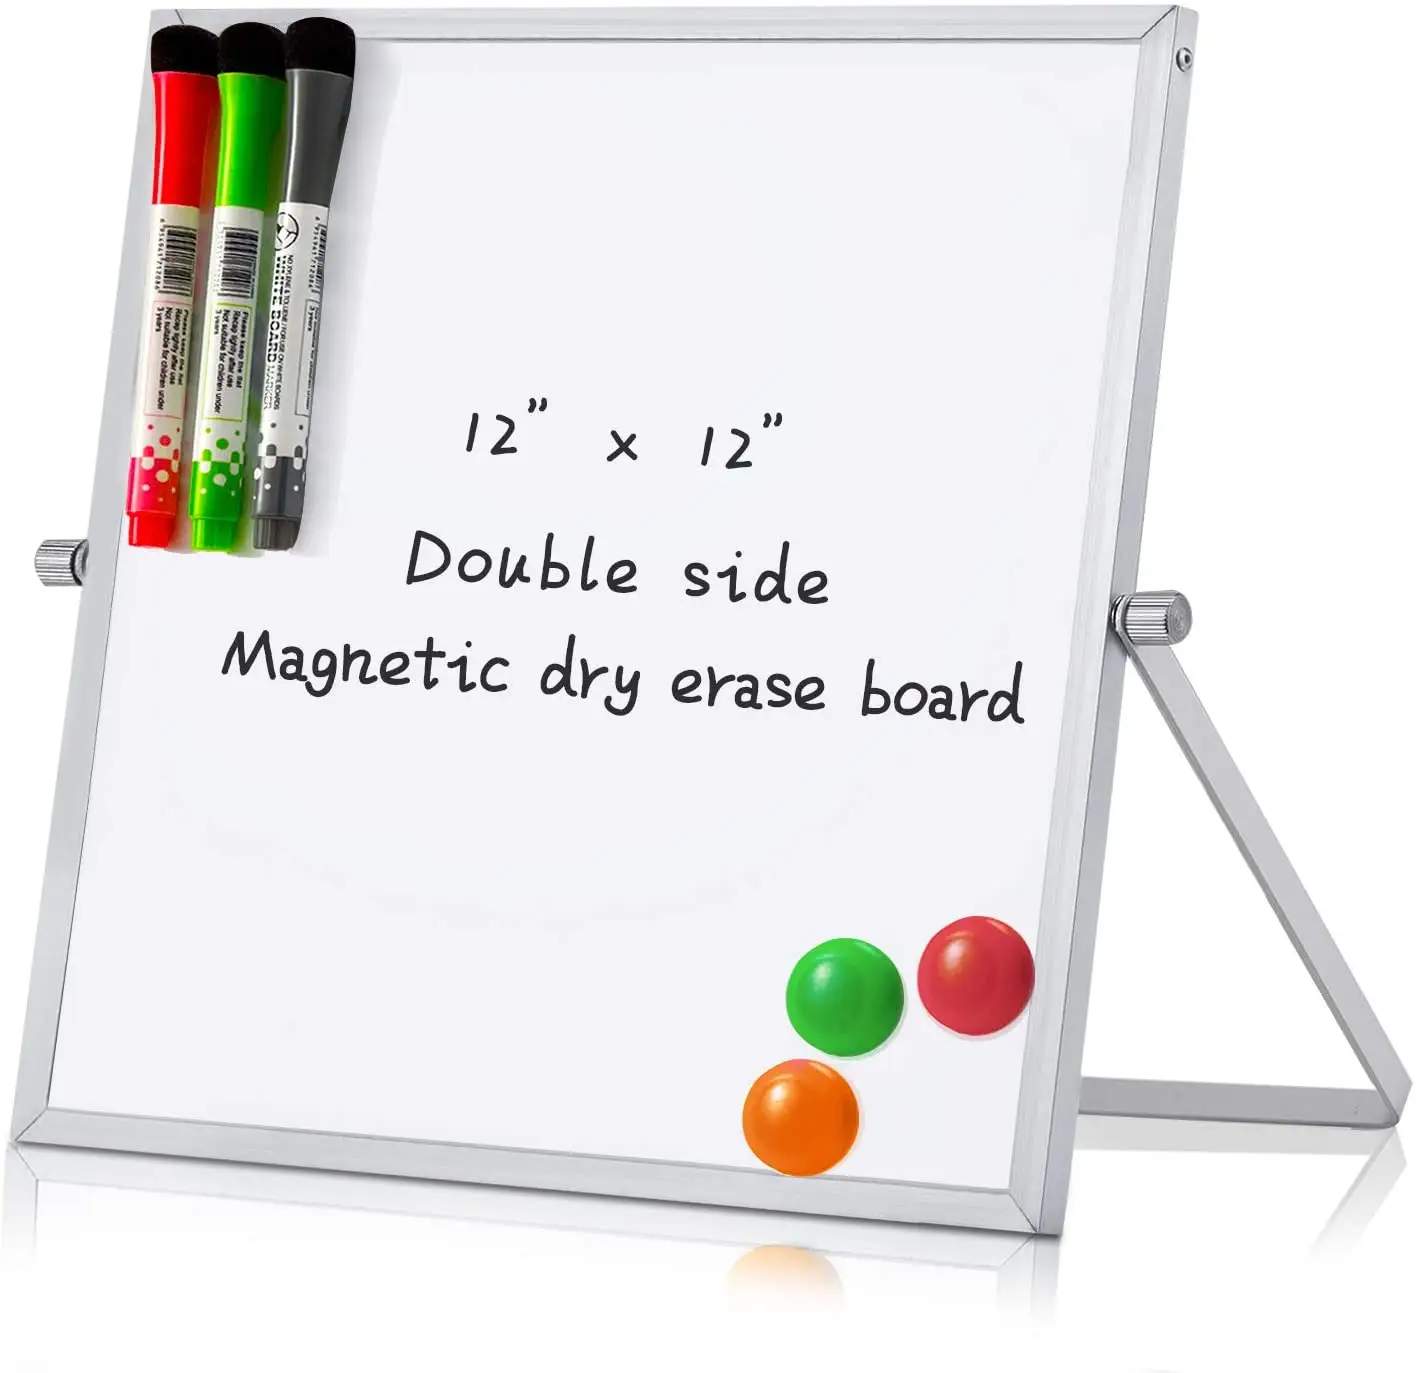 Hot Wideny Office Home Double Side Portable Small Dry Eraser Board Whiteboard With Markers Kids Magnetic White board